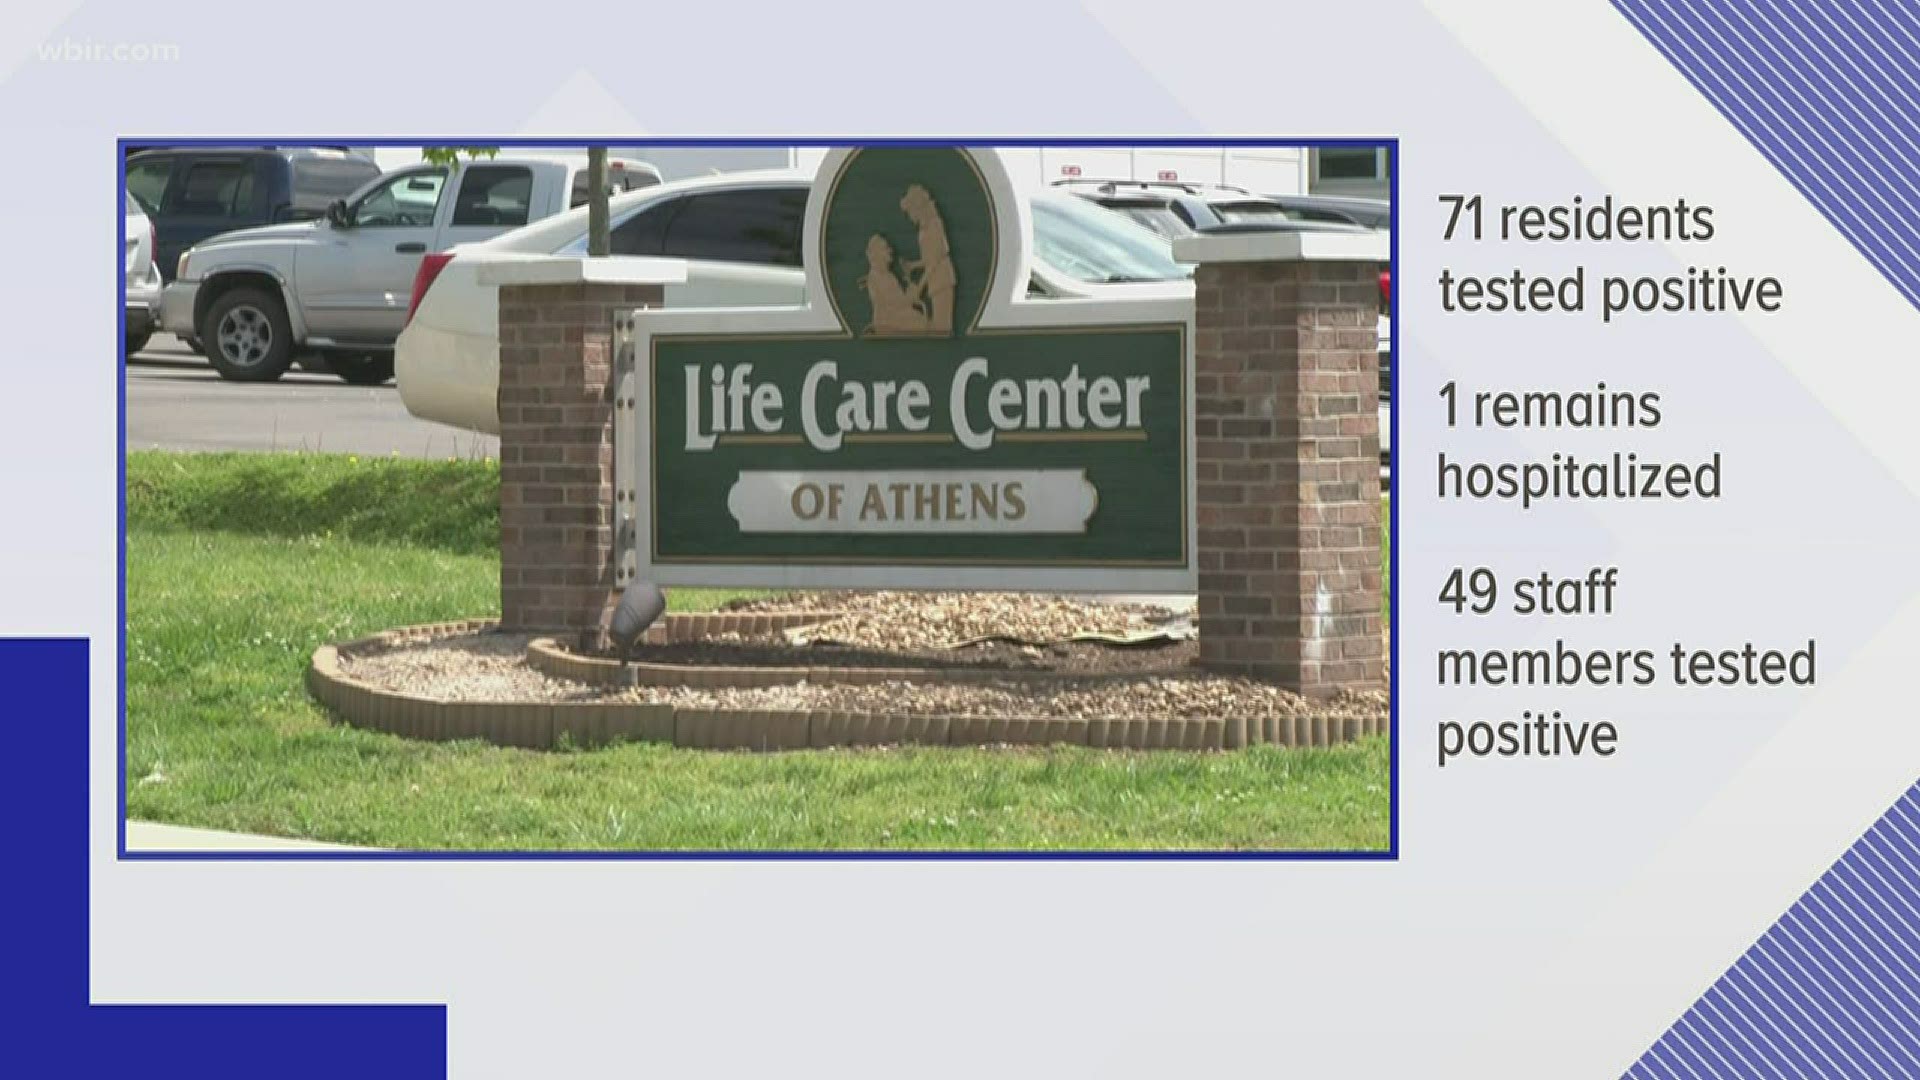 The total number of positive cases at Life Care Center of Athens between residents and staff is now up to 120.